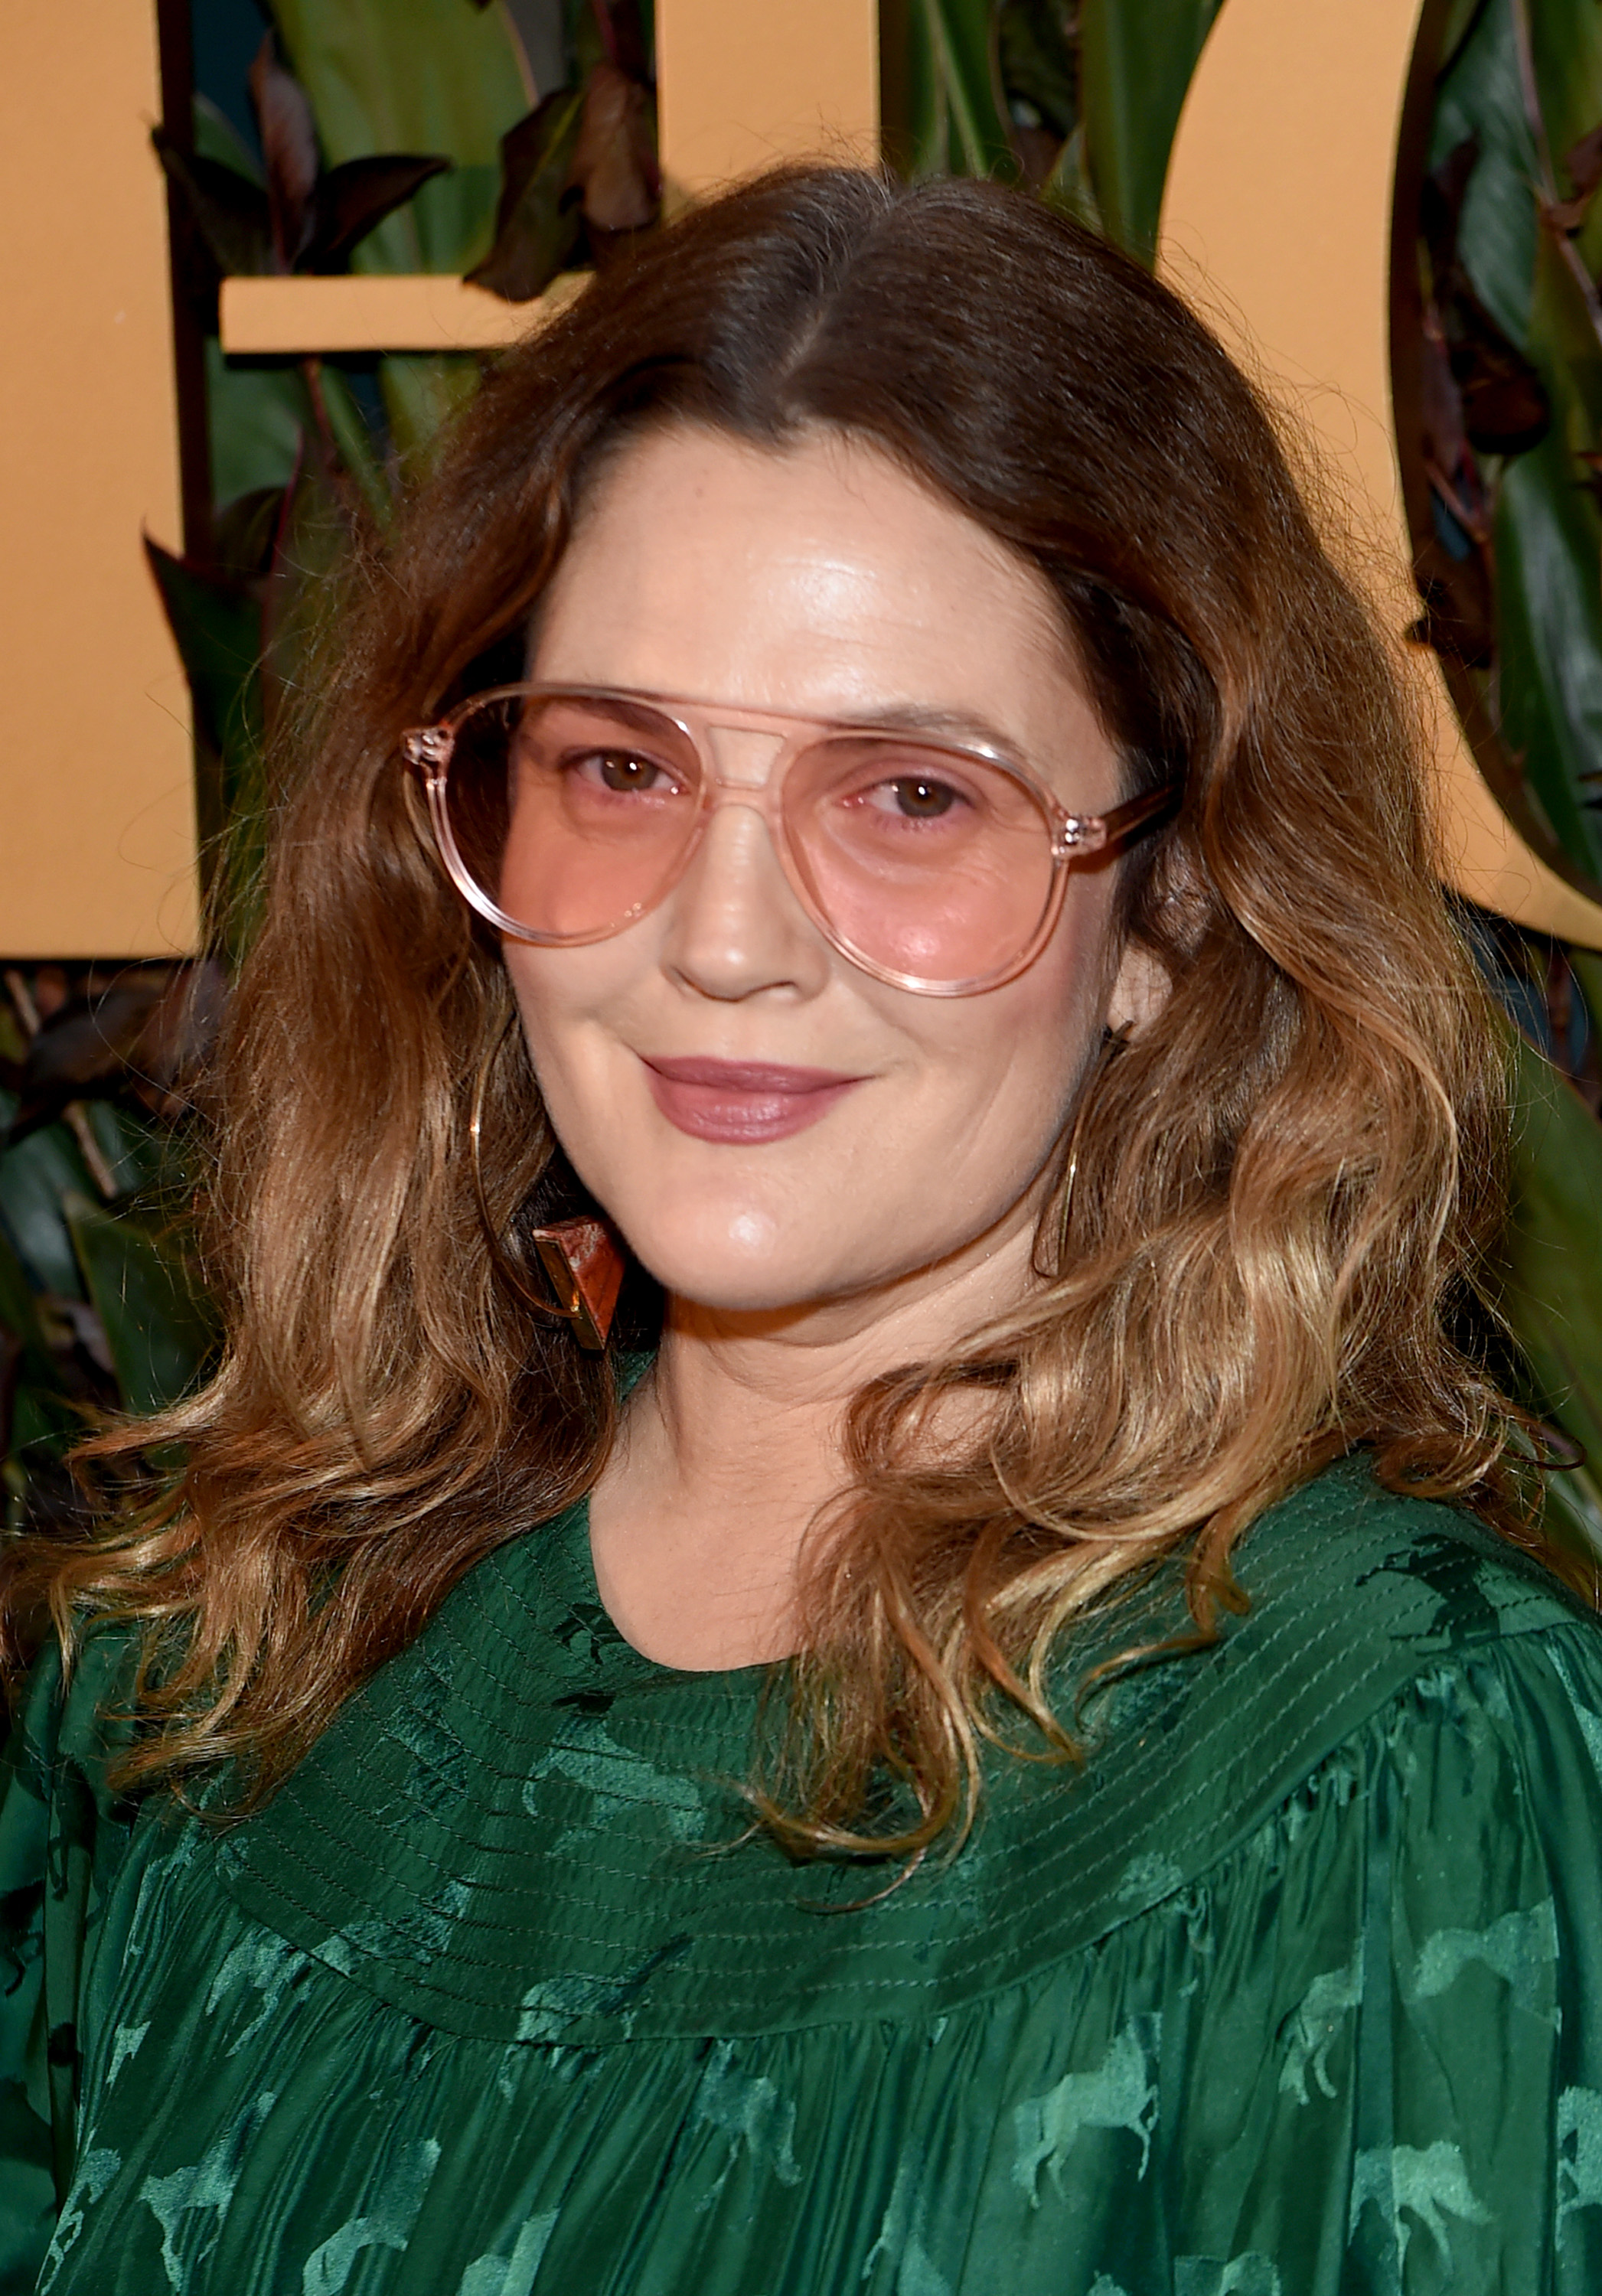 Drew Barrymore attends the 2019 WWD Honors at Intercontinental New York Barclay on October 29, 2019 in New York City. | Source: Getty Images